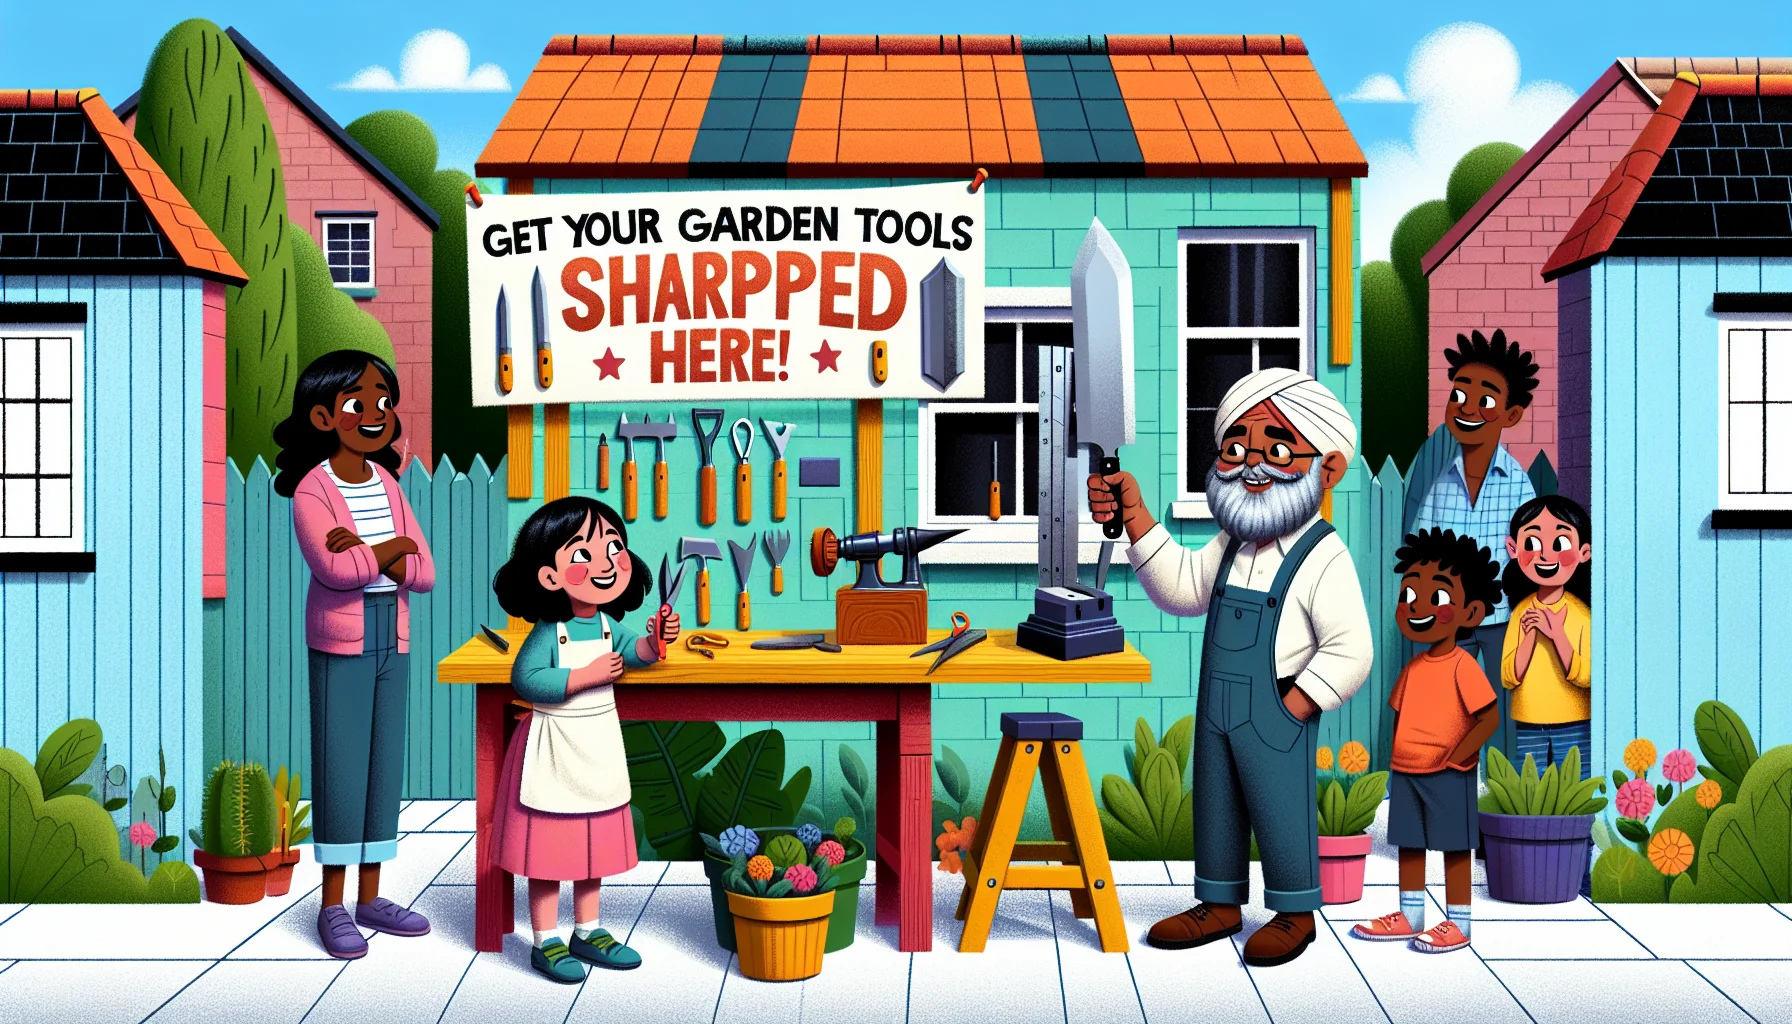 Create a playful and enticing scene set in a neighborhood. In the middle you see a South Asian man who is a gardener with an infectious smile, sharpening gardening tools at a vibrant workstation. A sign above reads, 'Get Your Garden Tools Sharpened Here!'. Nearby, a group of children, a Hispanic girl and a Black boy, is playfully mimicking the gardener with toy tools. A Caucasian woman stands to the side, watching the scene with sparkling eyes, holding her own dull tools, clearly amused and inspired to start gardening.